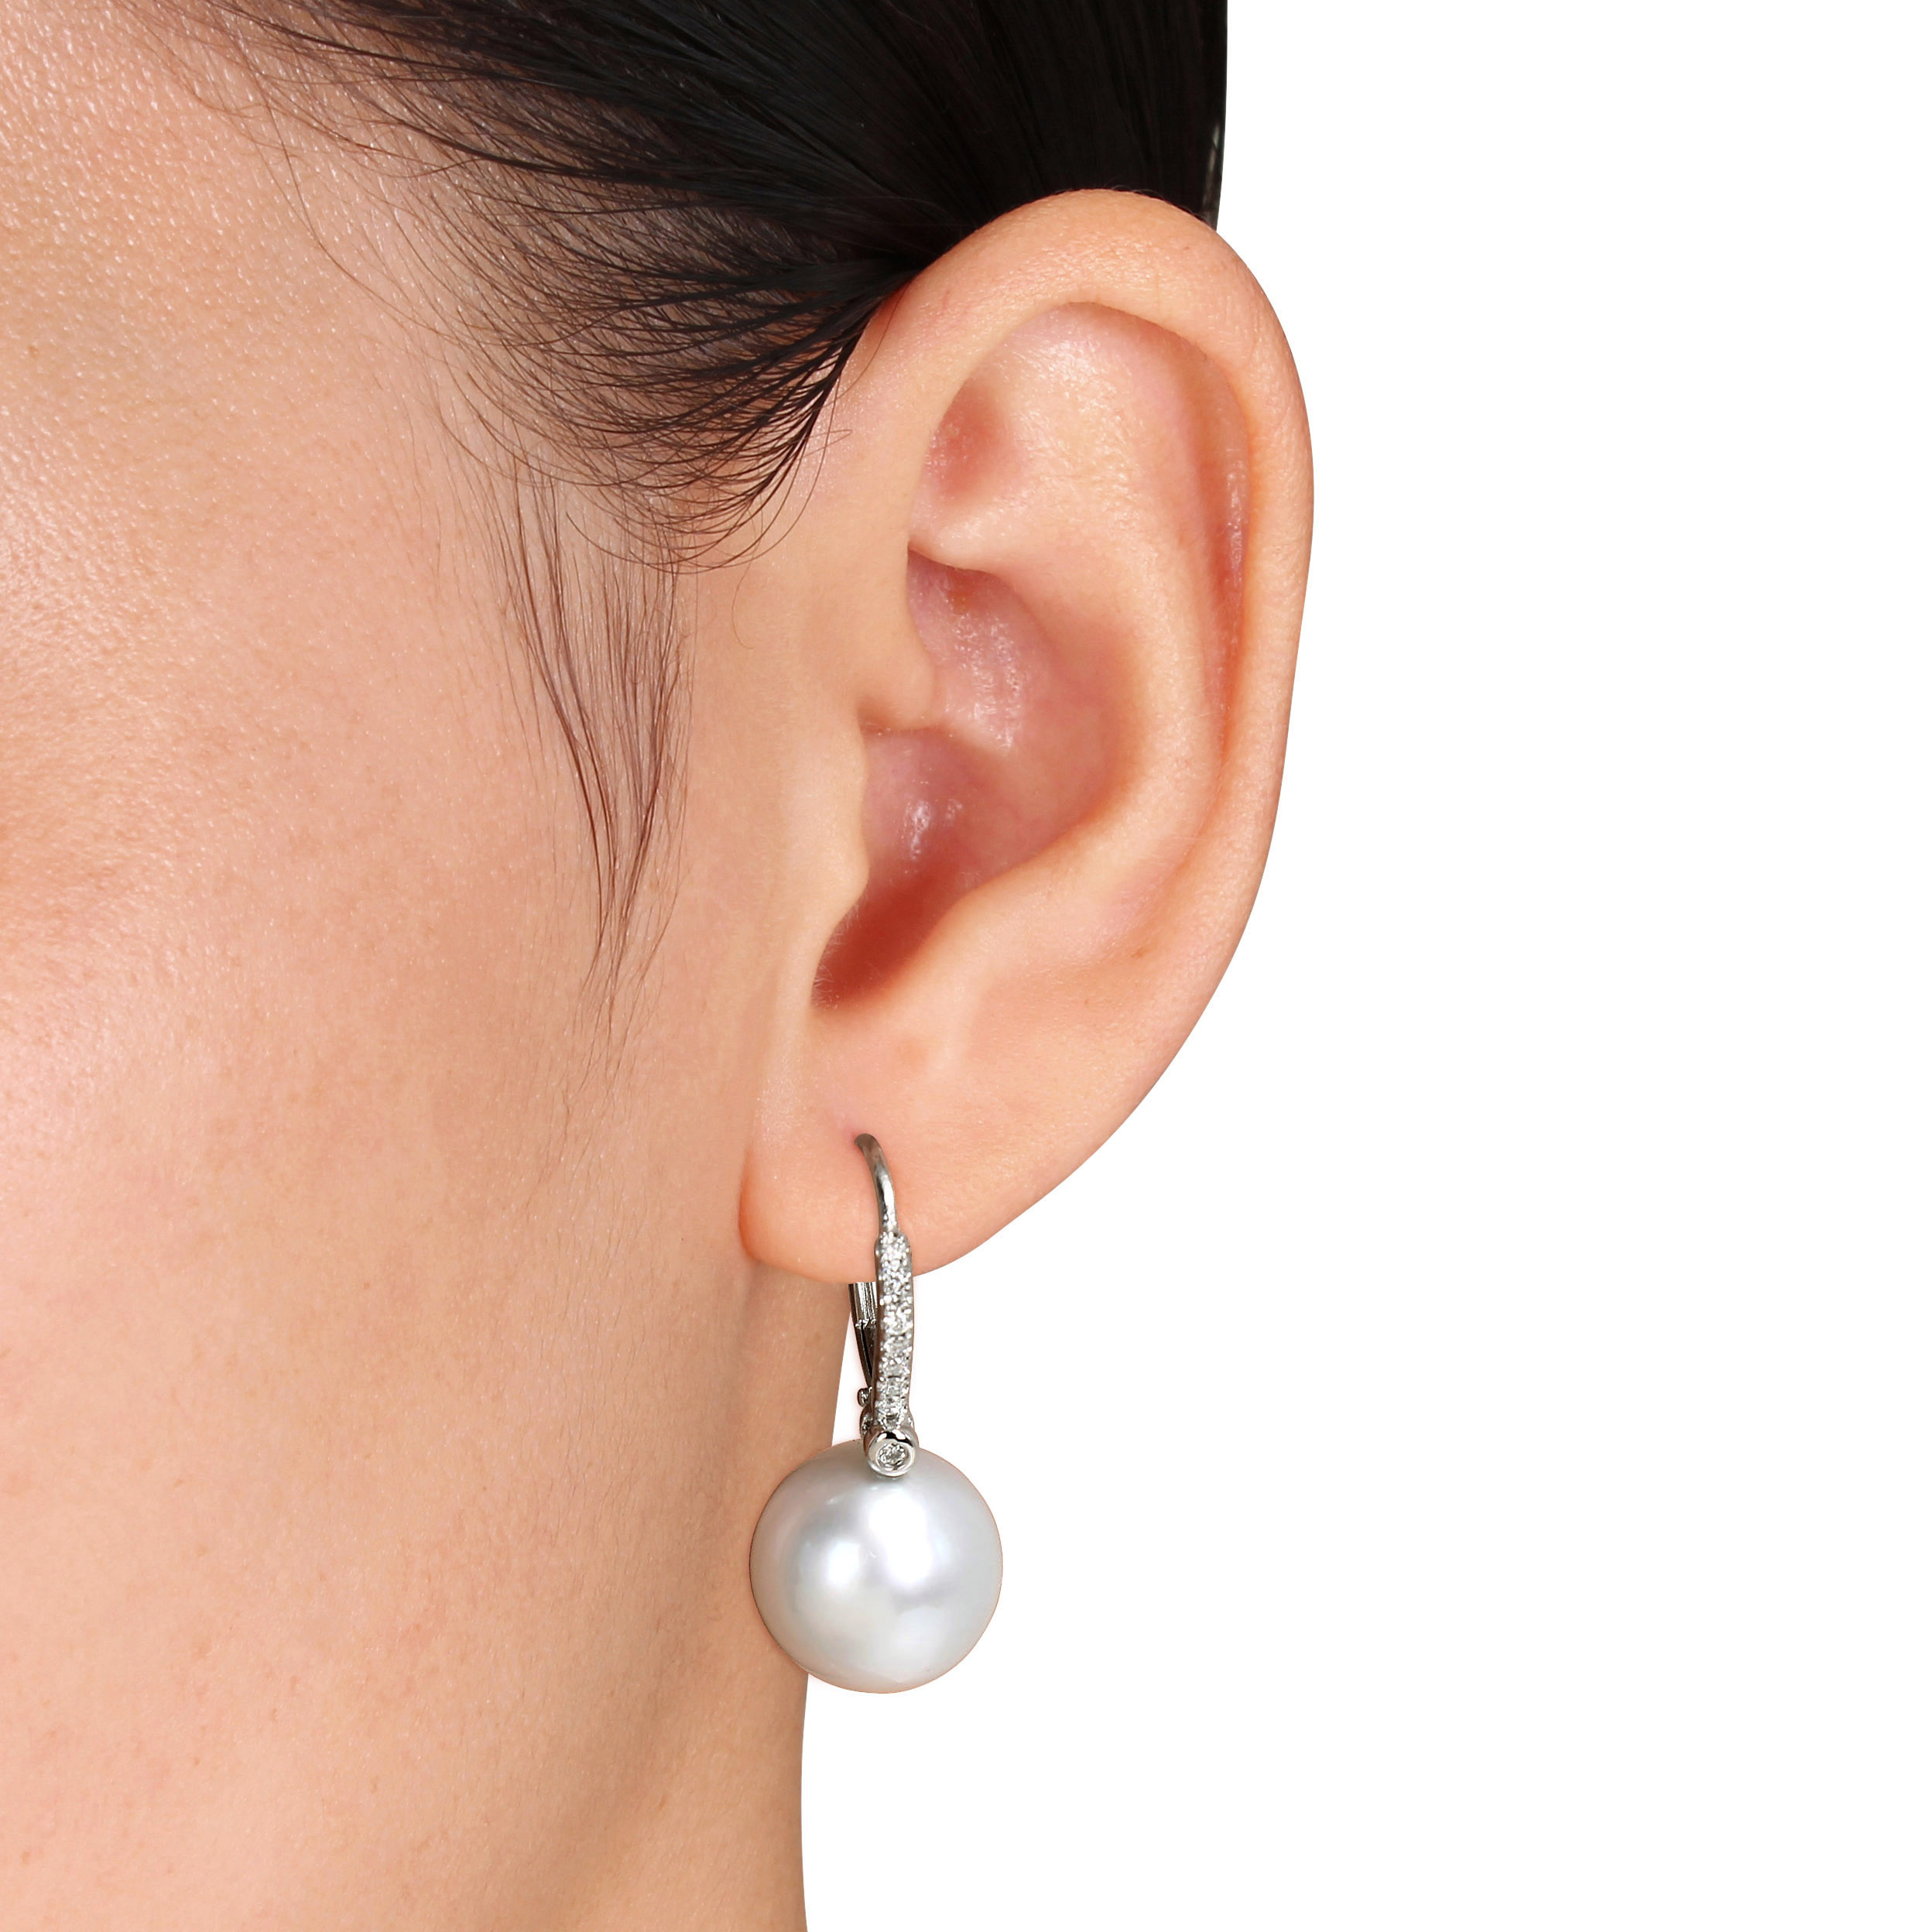 11 - 12 MM South Sea Cultured Pearl and 1/8 CT TW Diamond Leverback Earrings in 14k White Gold